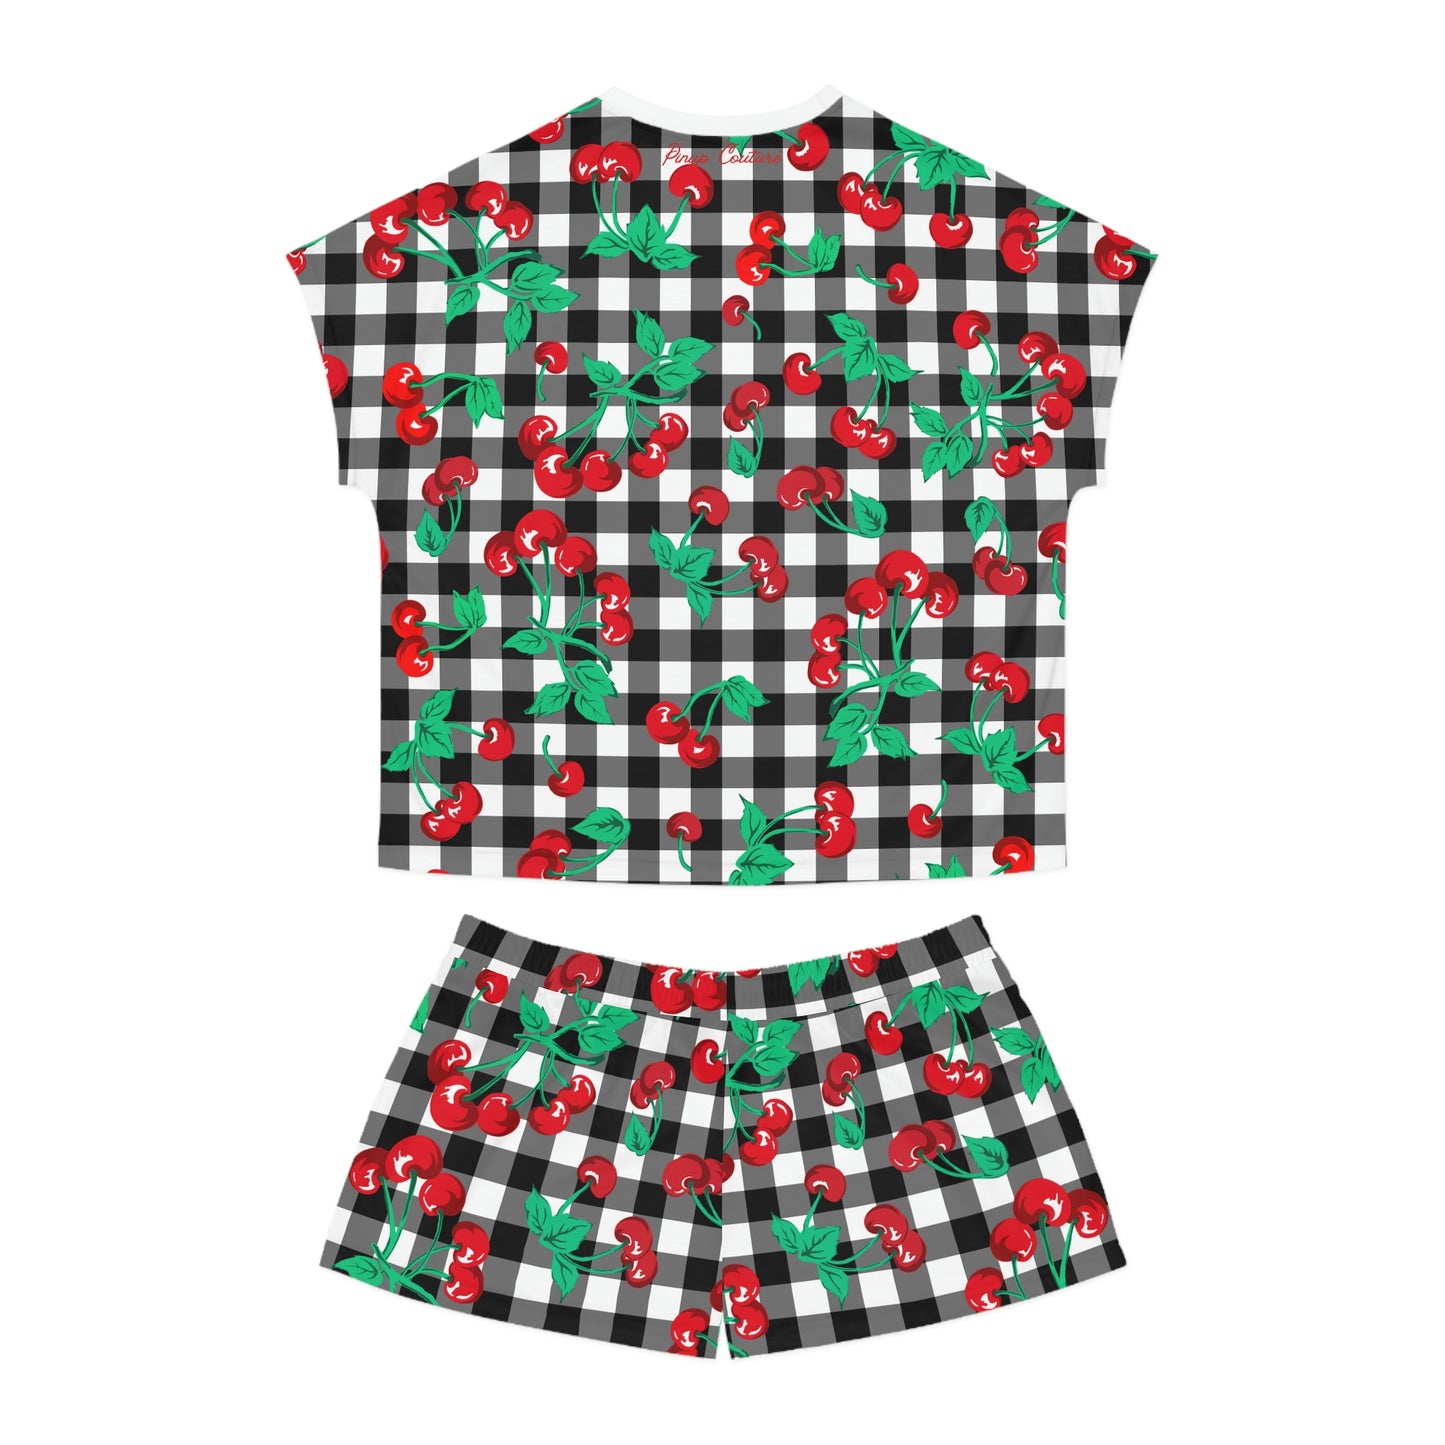 TGIF Sleepover PJs in Black & White Gingham Cherry Girl Tee & Pajama Shorts-Set | Pinup Couture Relaxed